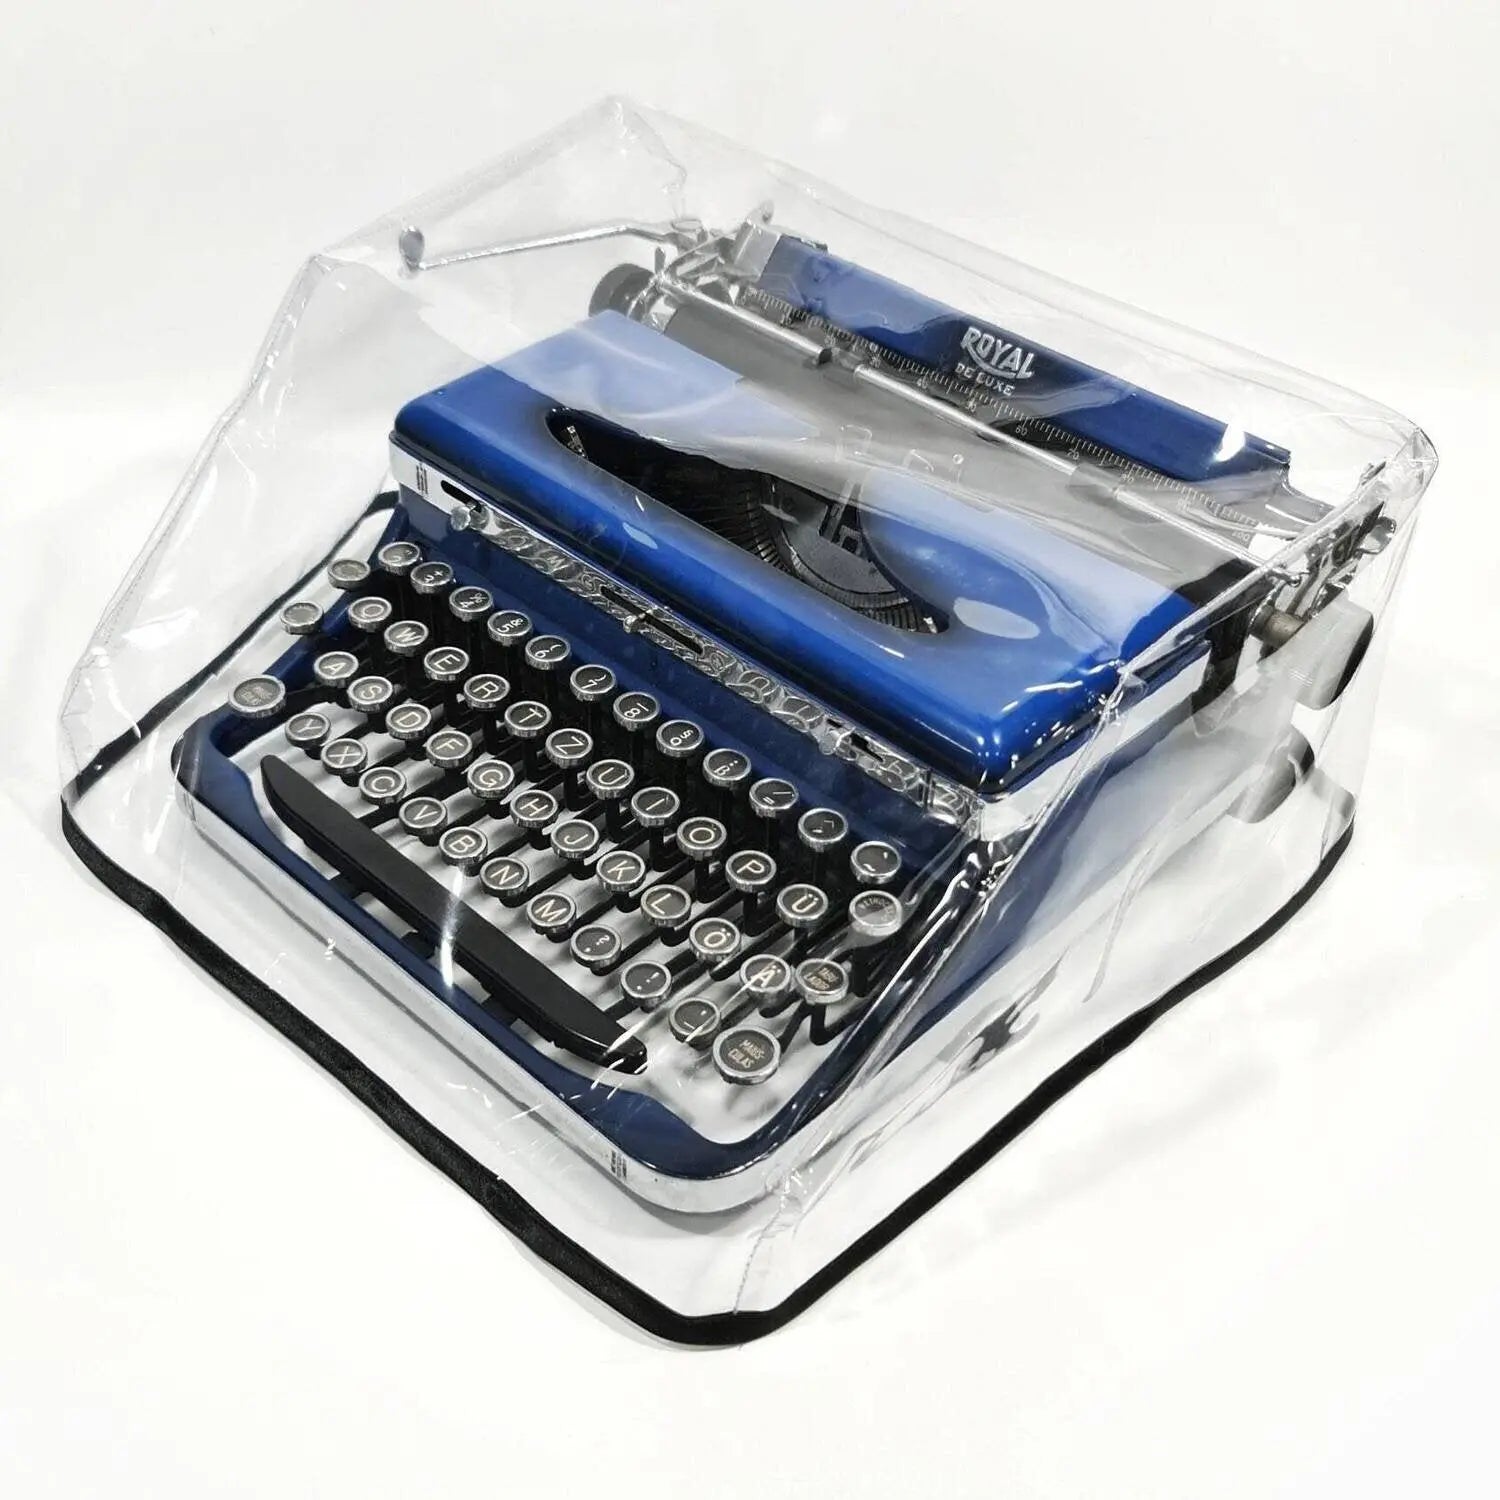 MEDIUM Transparent Dust Cover for Royal P, A, O, Typewriter Typewriter.Company